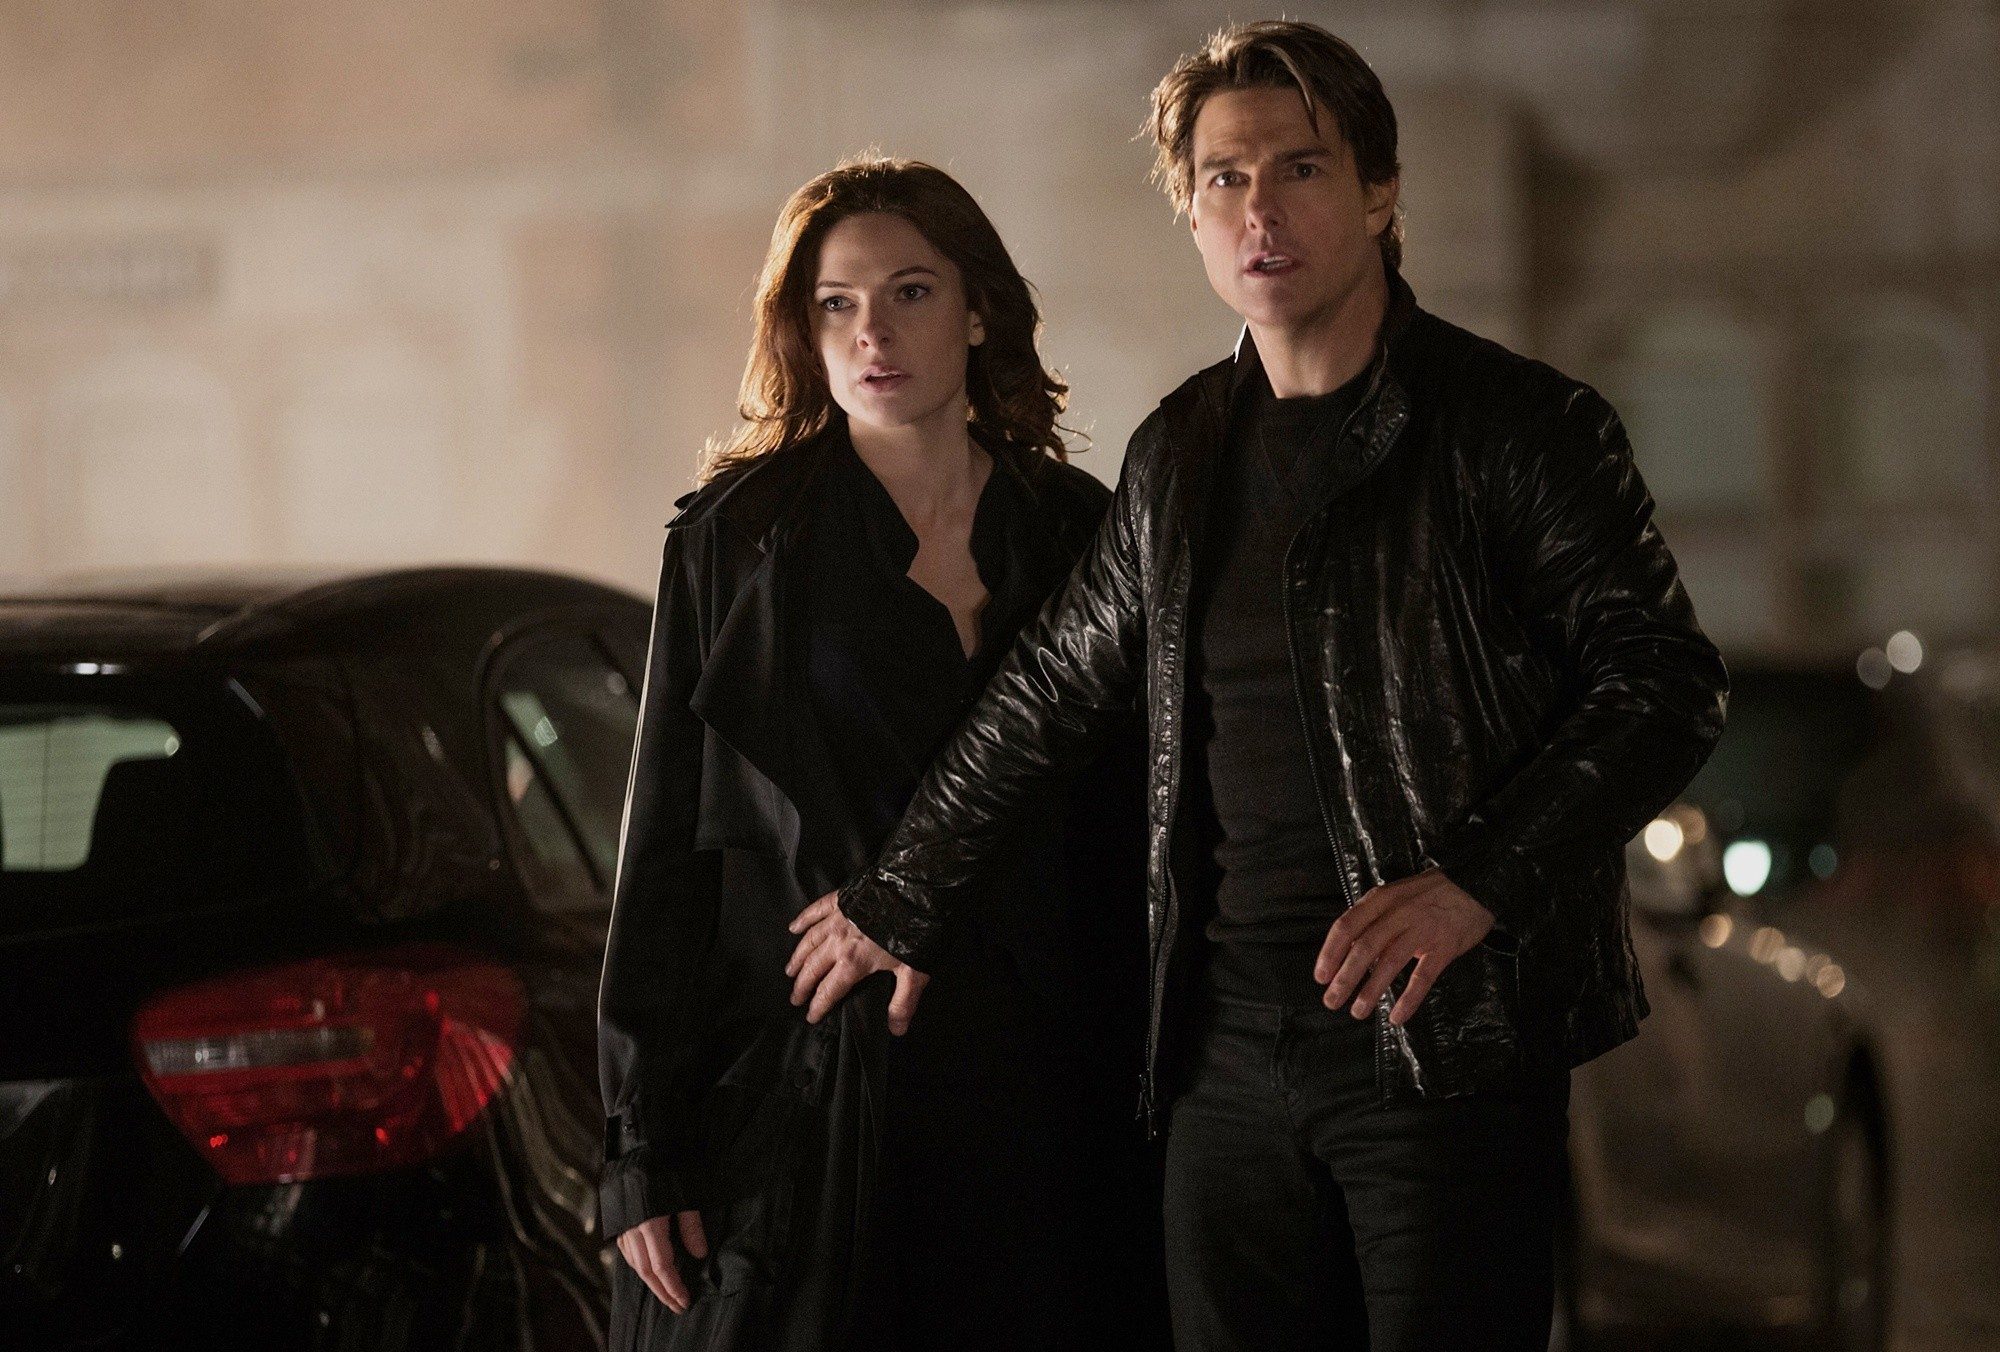 America Olivo and Tom Cruise (stars as Ethan Hunt) in Paramount Pictures' Mission: Impossible Rogue Nation (2015)